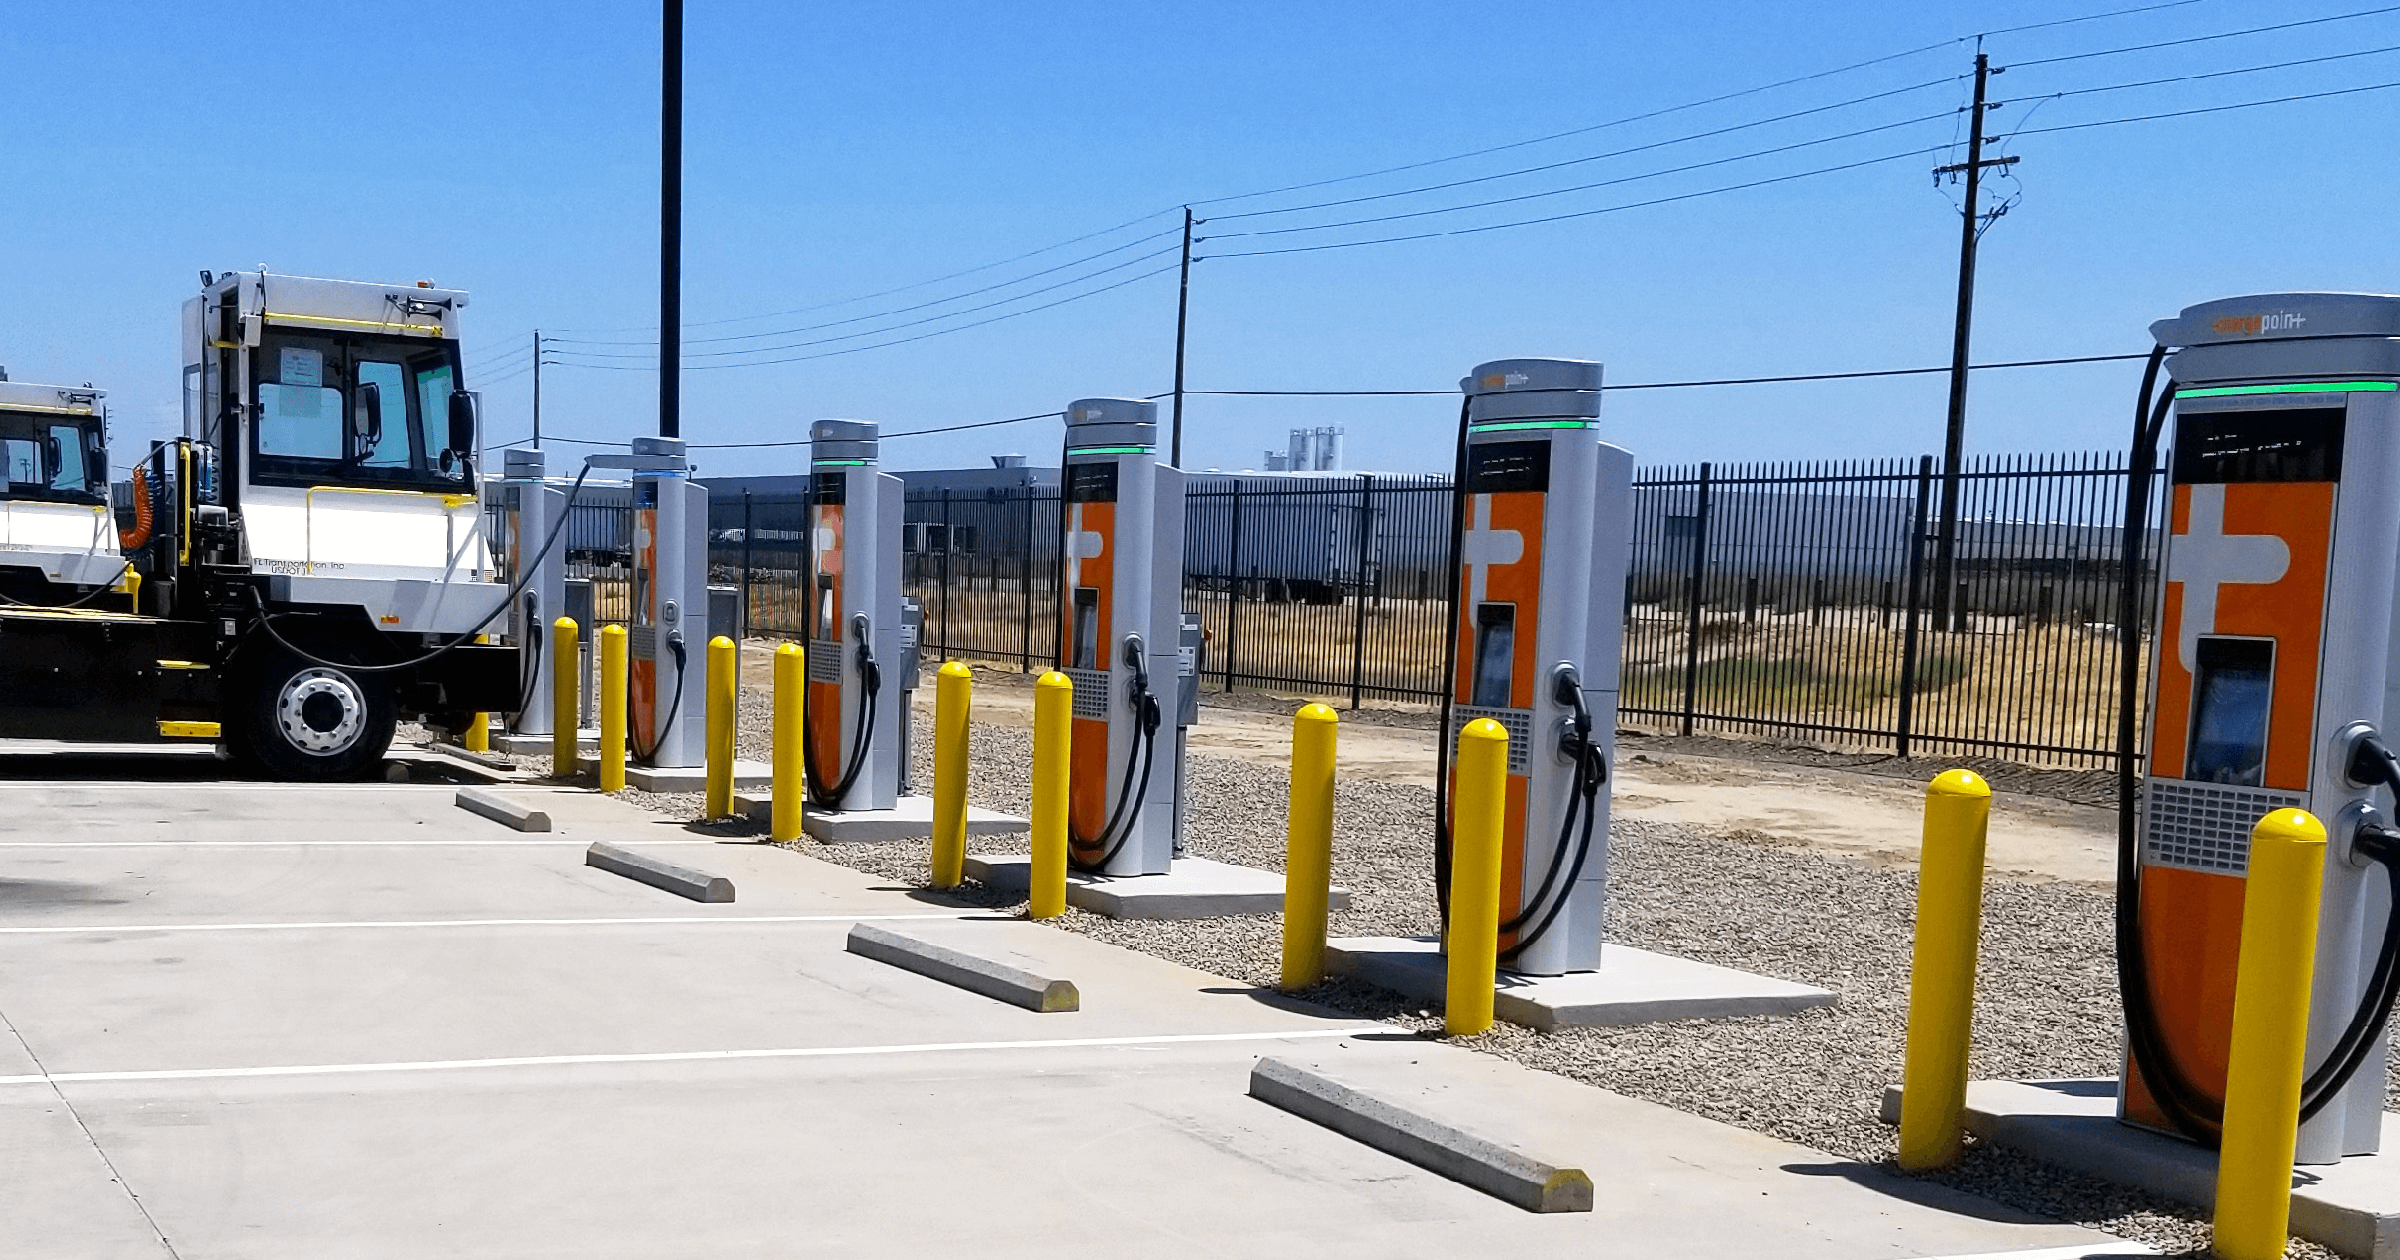 ChargePoint Express Plus - Modular Level 3 Electric Car Charging Station